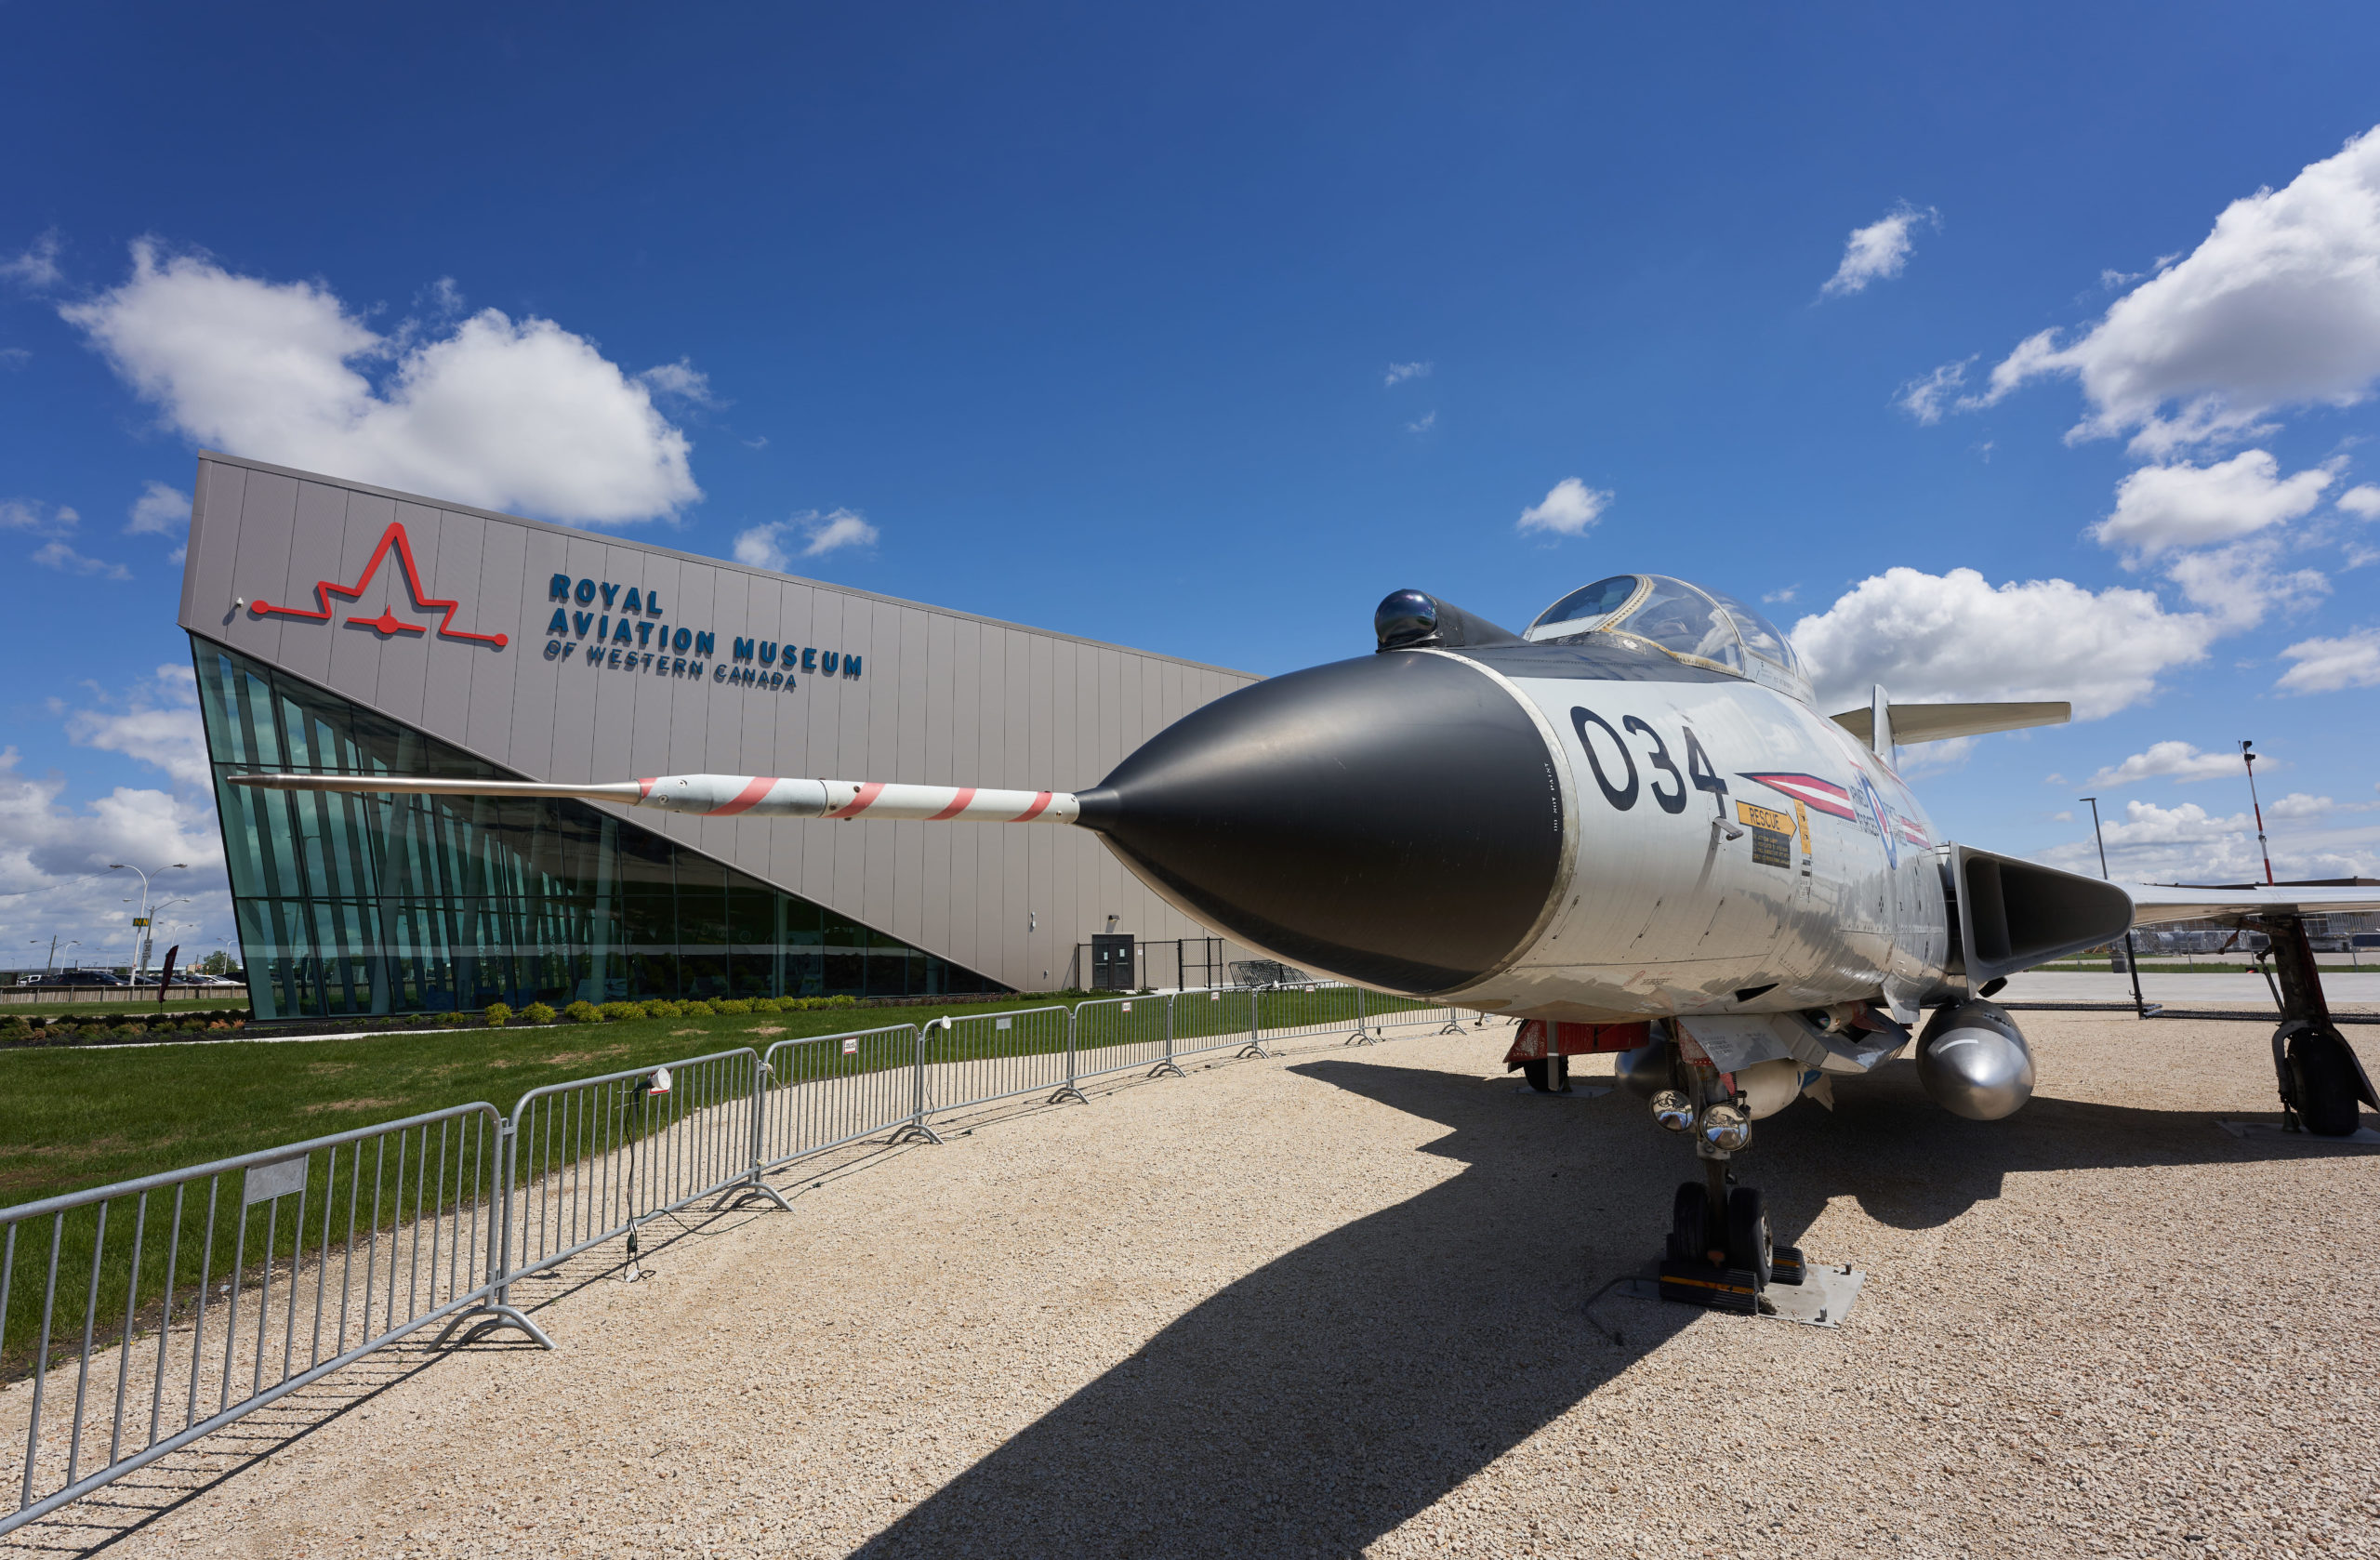 Image of CF-101 Voodoo in front of Royal Aviation Museum